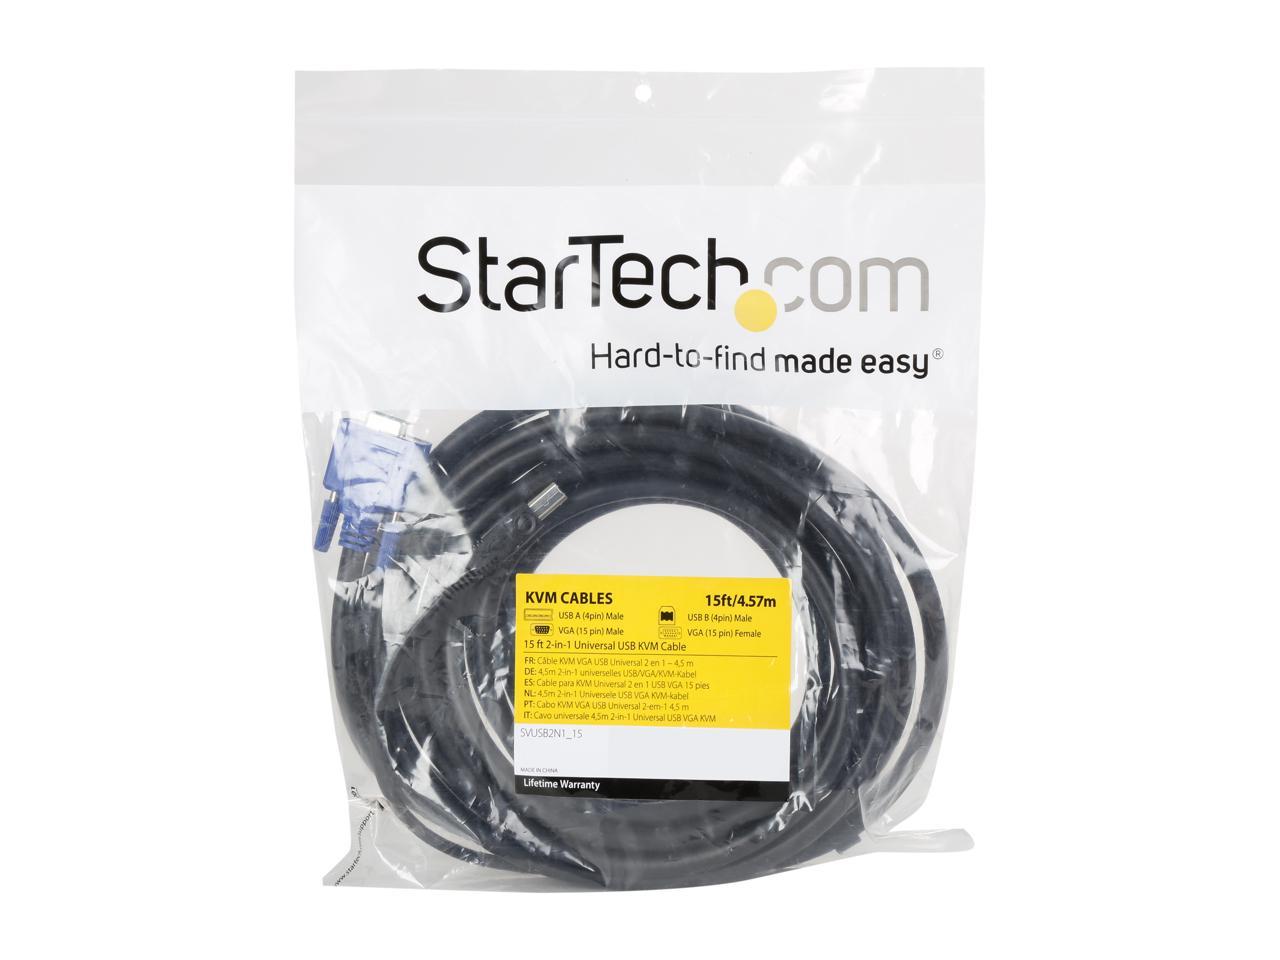 StarTech.com 15 ft. USB+VGA 2-in-1 KVM Switch Cable SVUSB2N1_15 - image 3 of 3